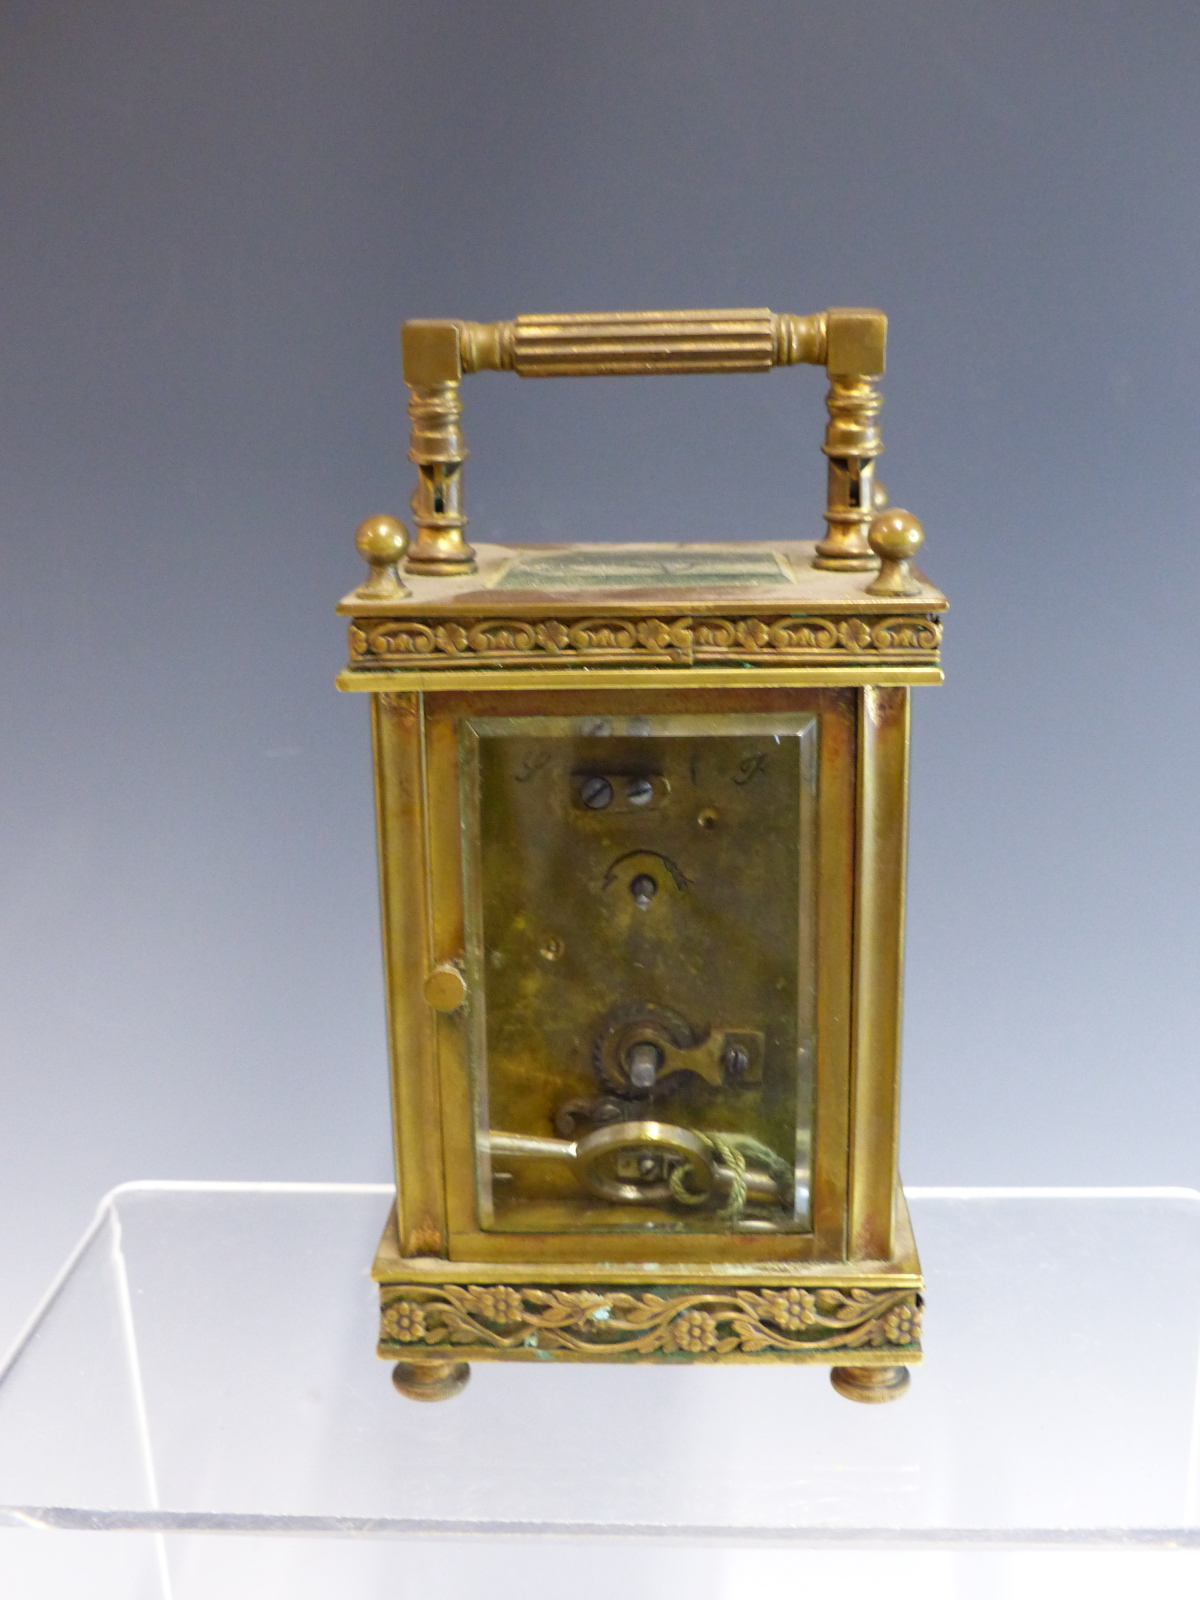 AN EARLY 20TH CENTURY BRASS CASED CARRIAGE CLOCK WITH WHITE ENAMEL DIAL. - Image 3 of 3